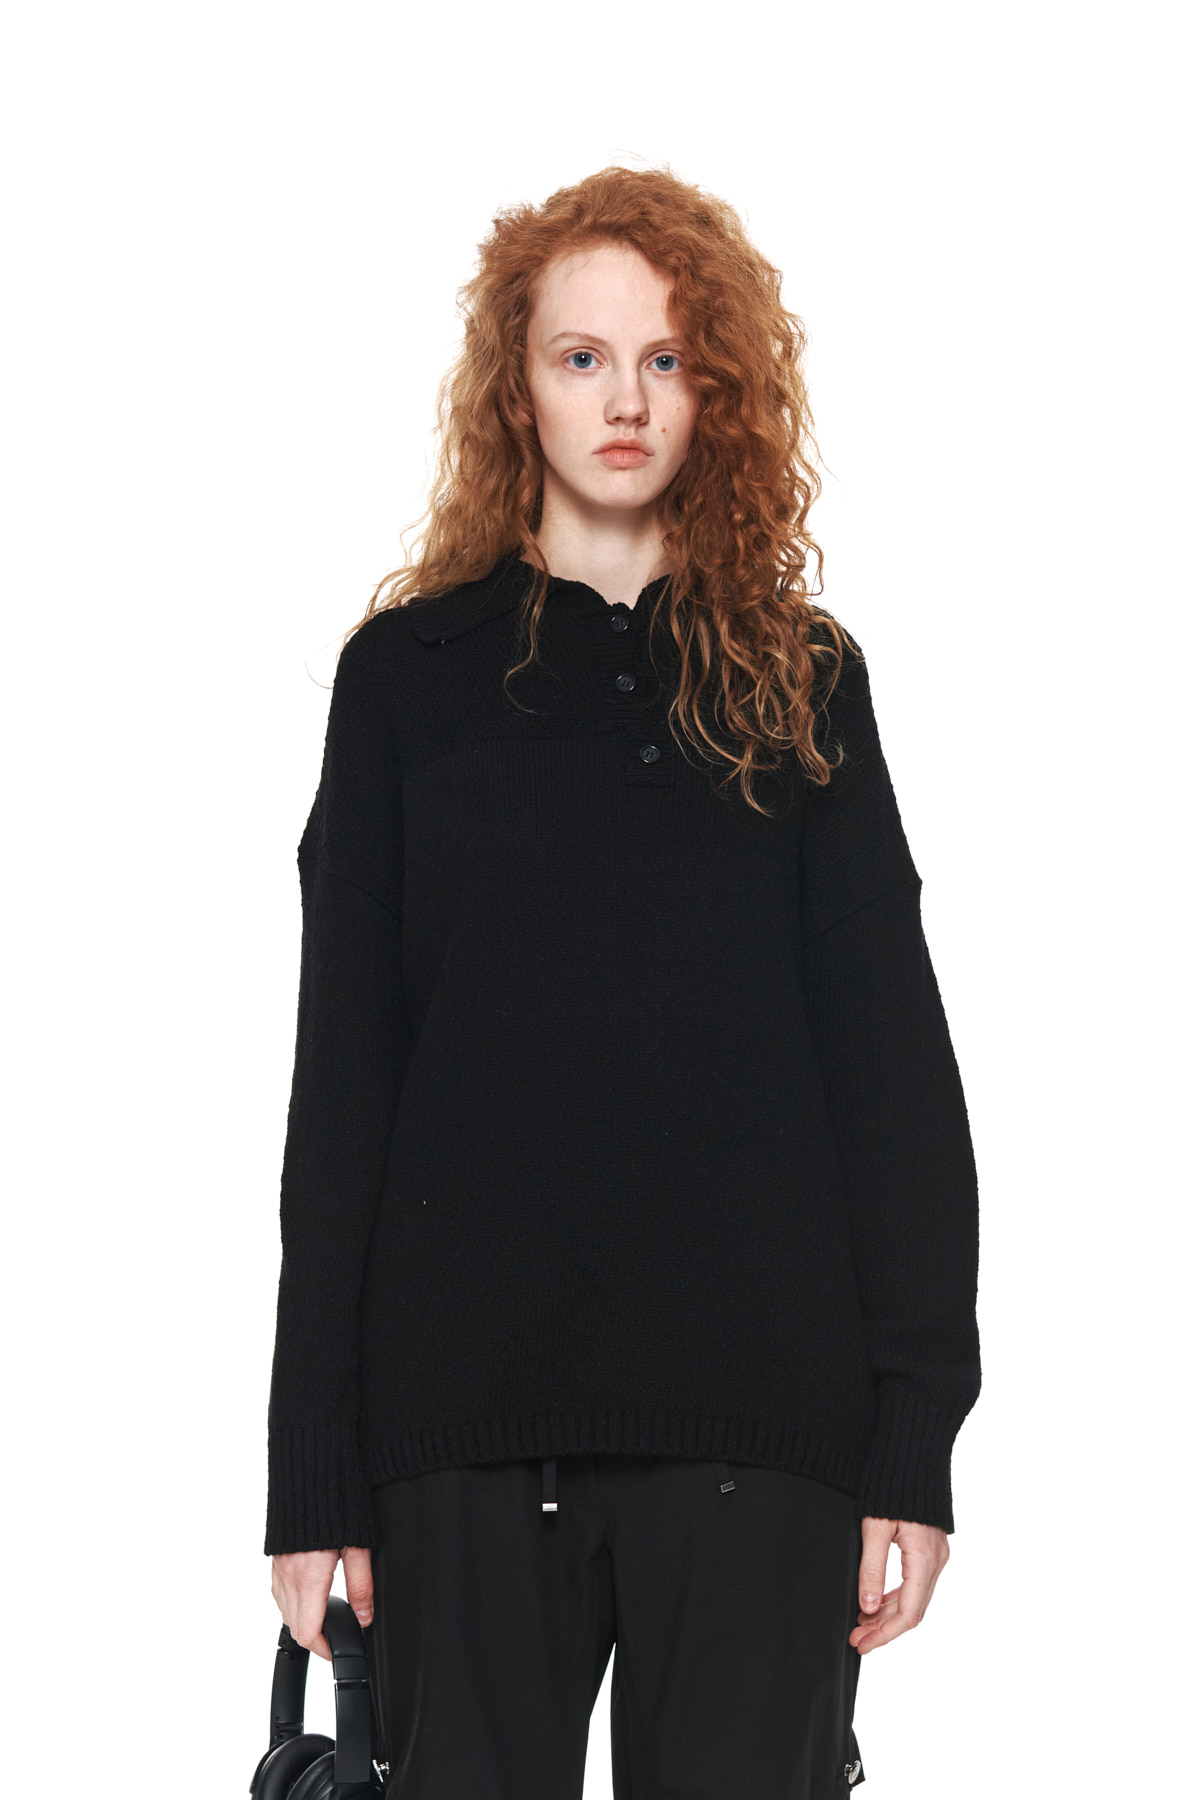 LOOSE PIQUE KNIT PULLOVER IN BLACK